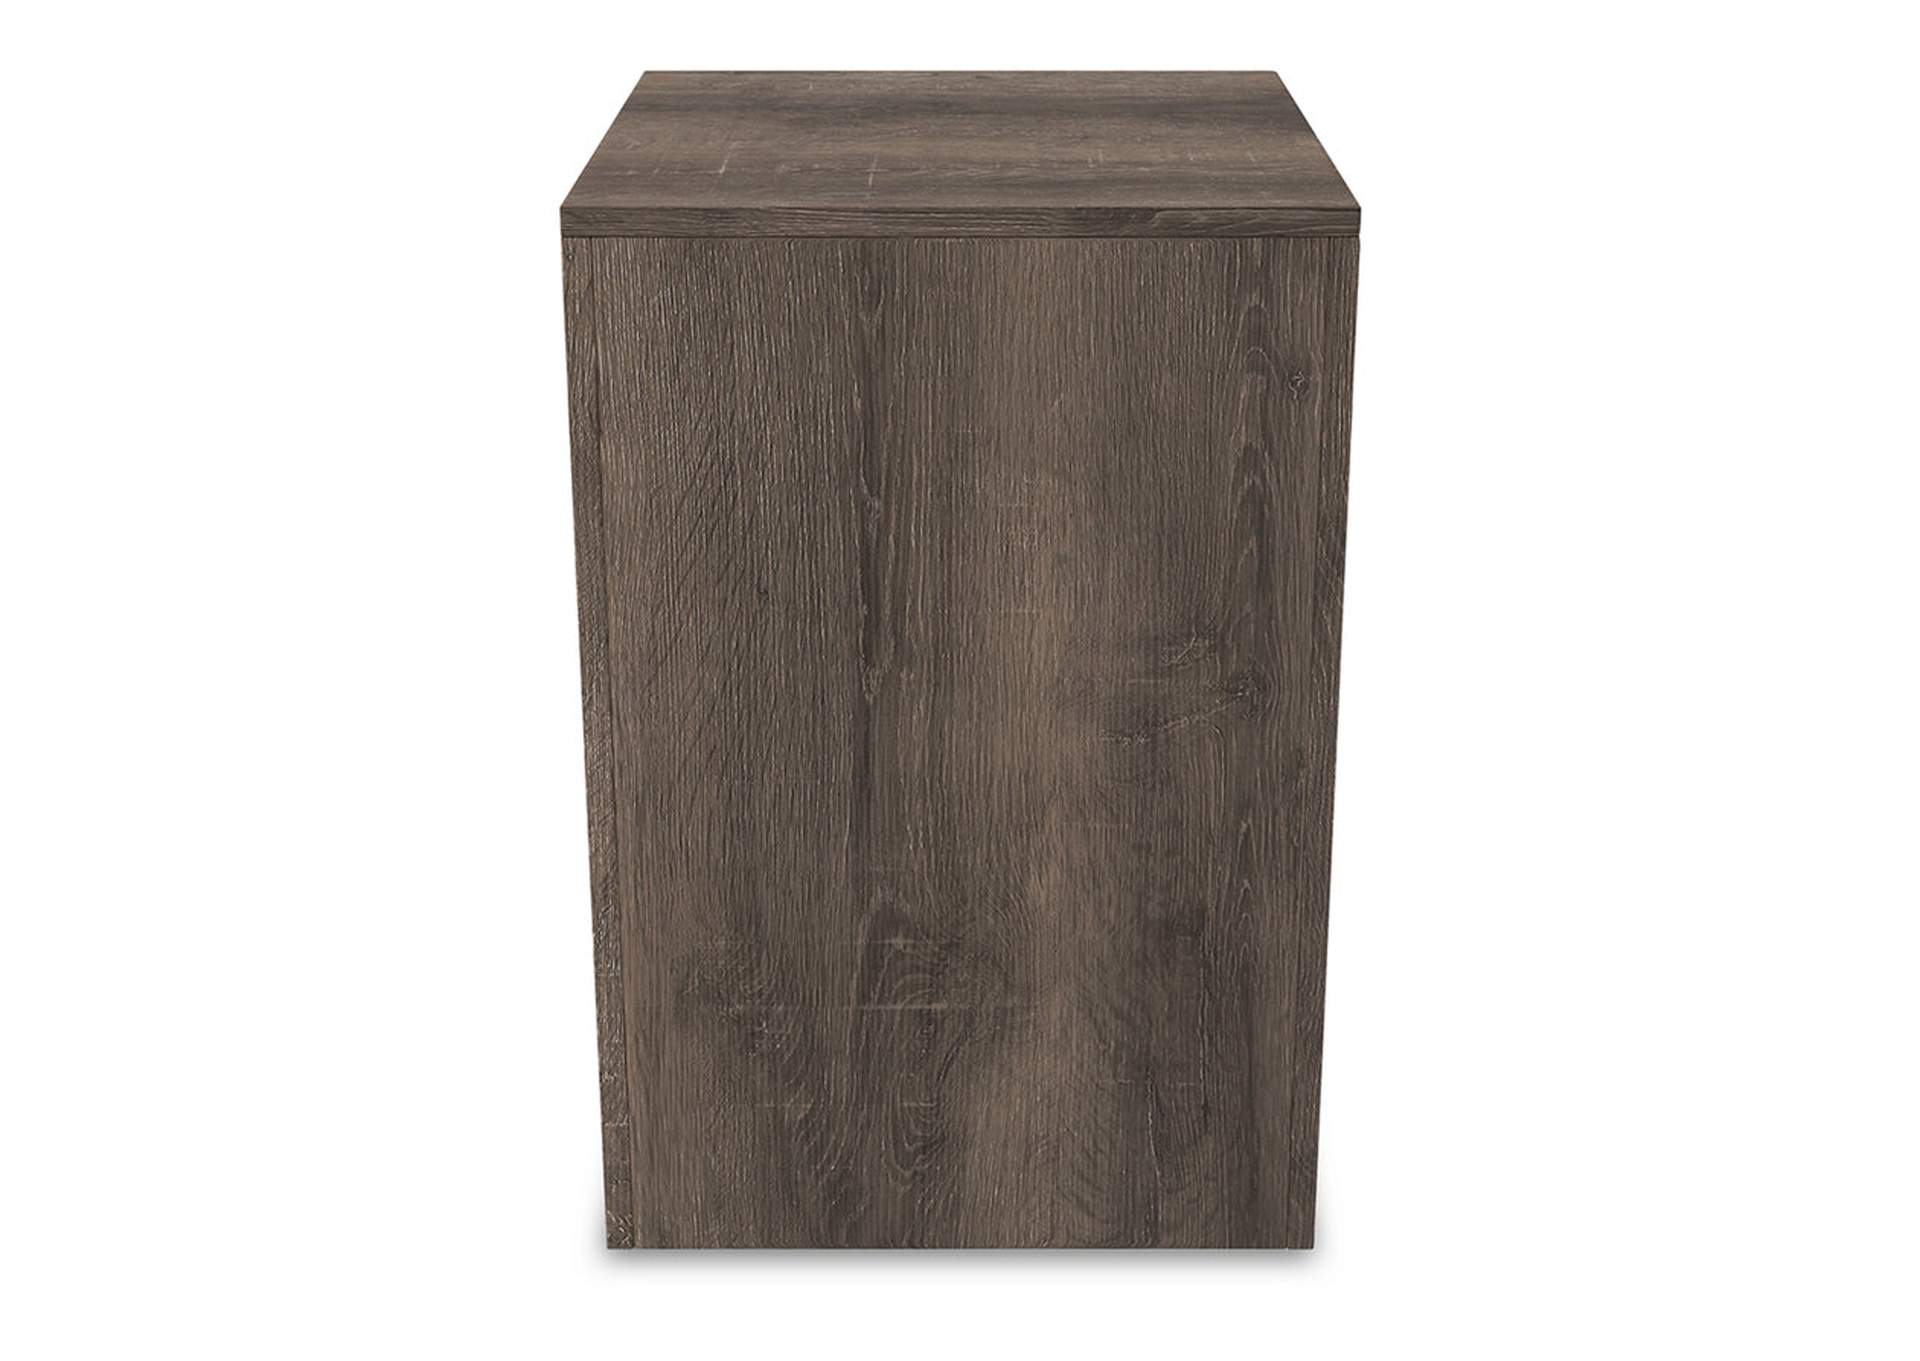 Arlenbry File Cabinet,Signature Design By Ashley